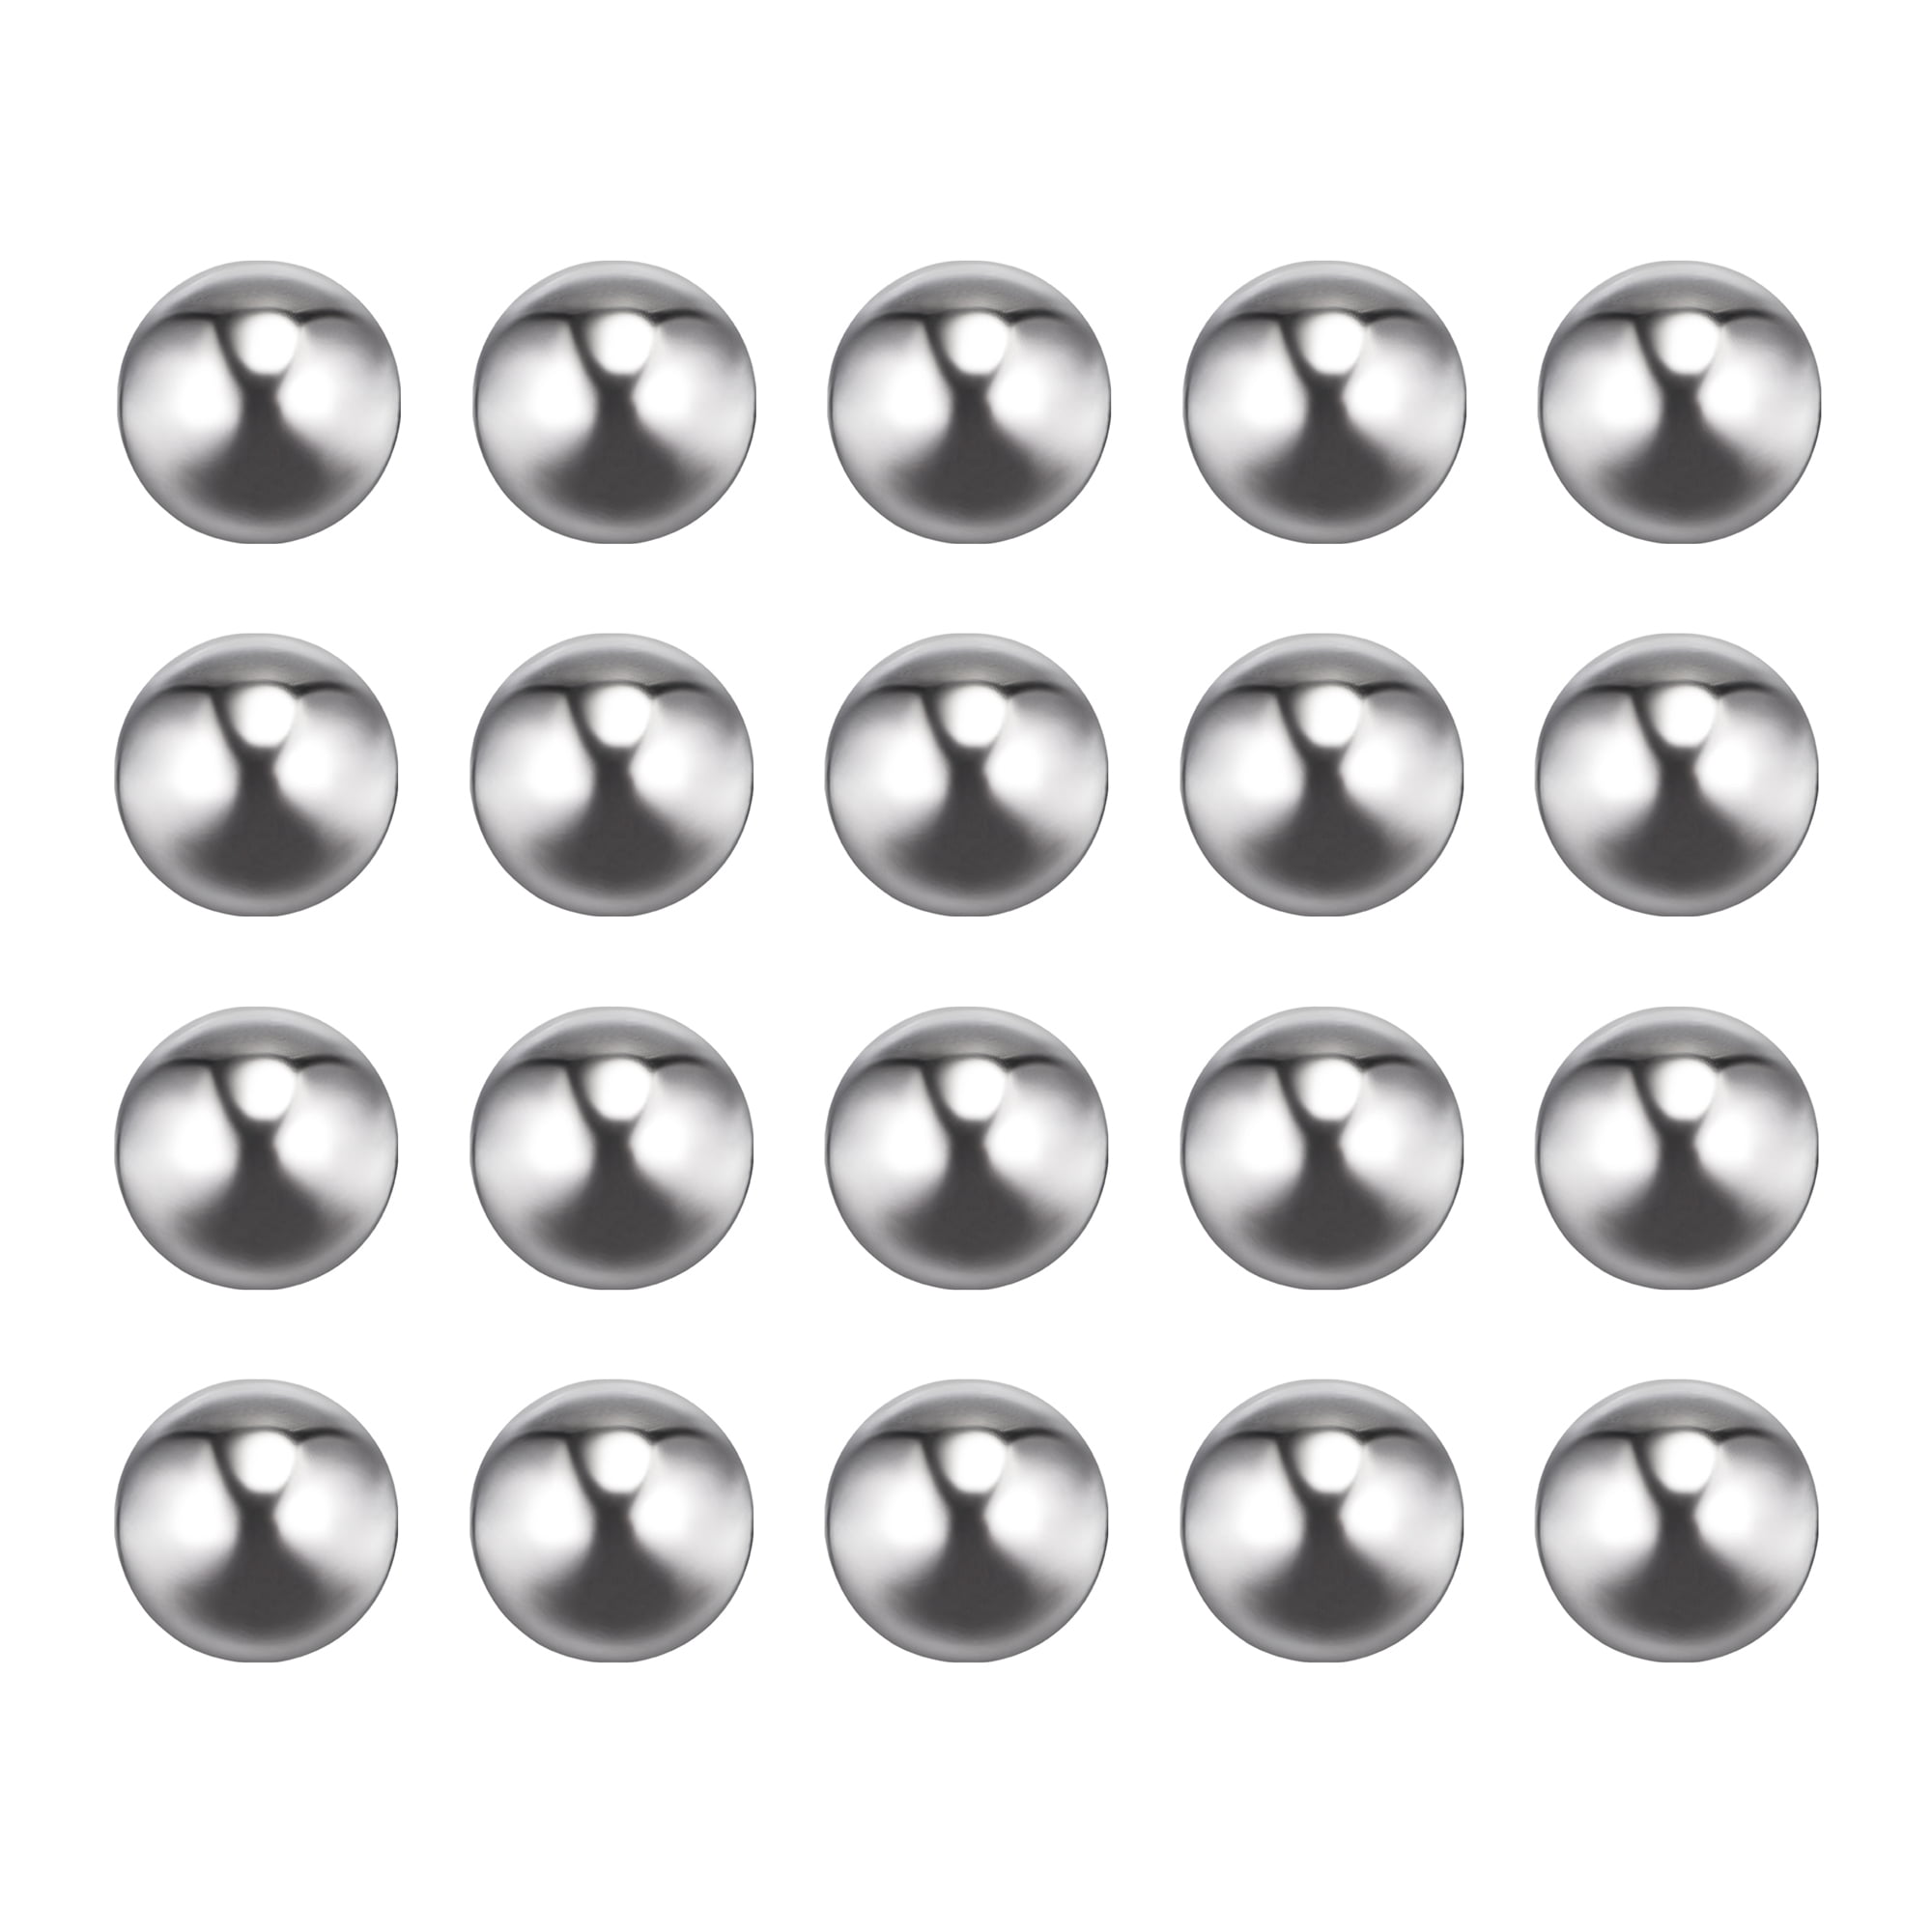 sourcing map 50pcs 12mm 201 Stainless Steel Bearing Balls G1000 Precision